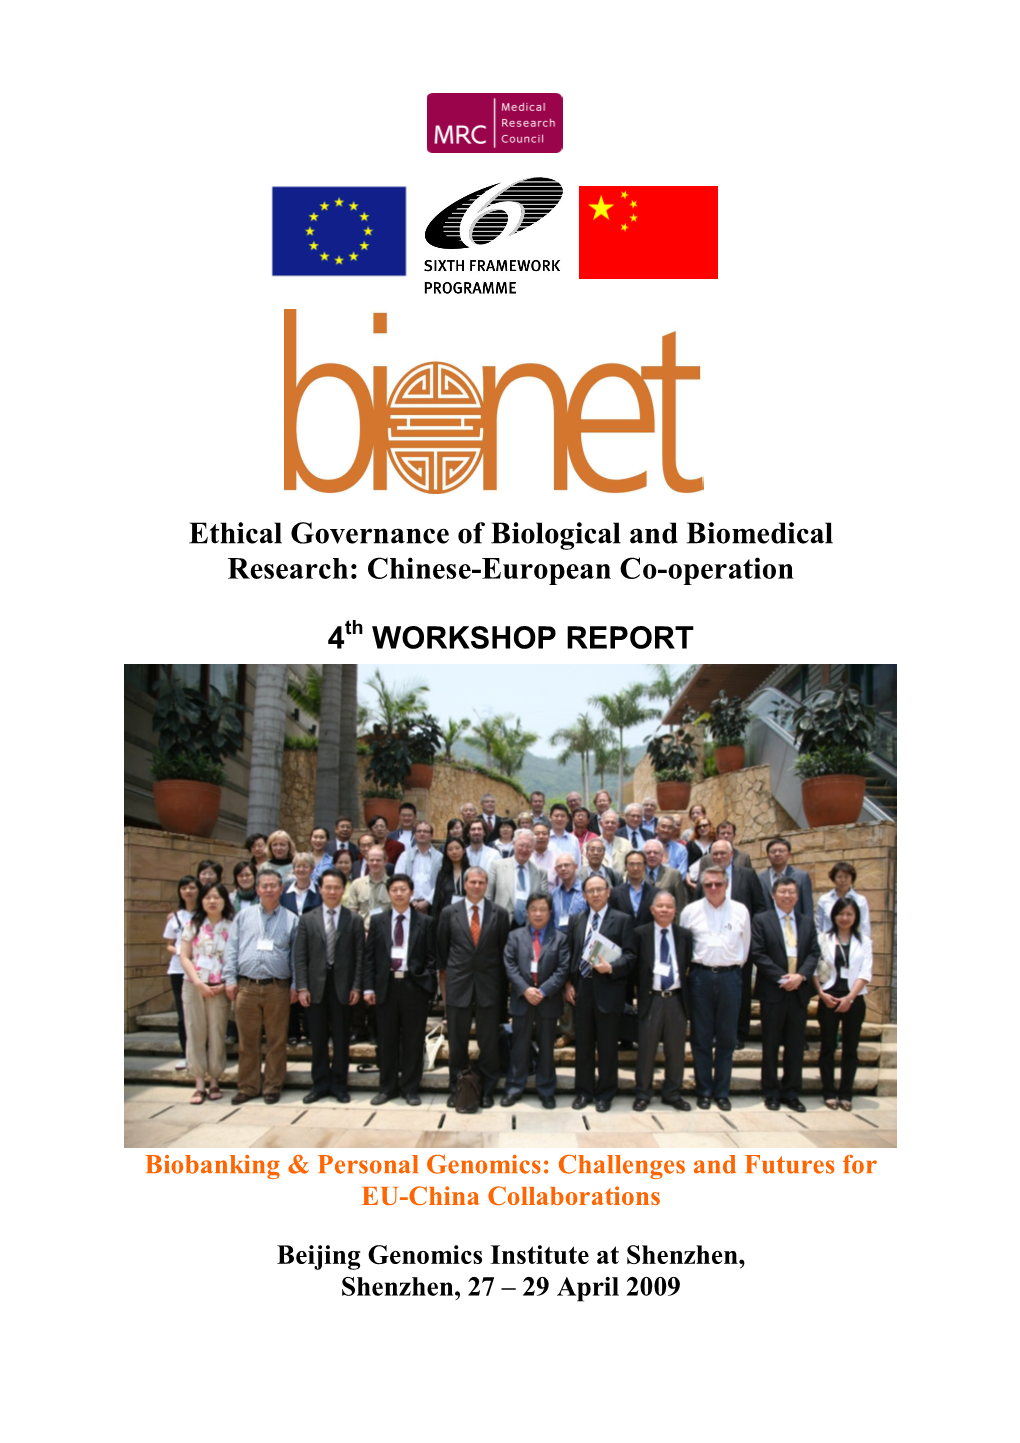 Ethical Governance of Biological and Biomedical Research: Chinese-European Co-Operation